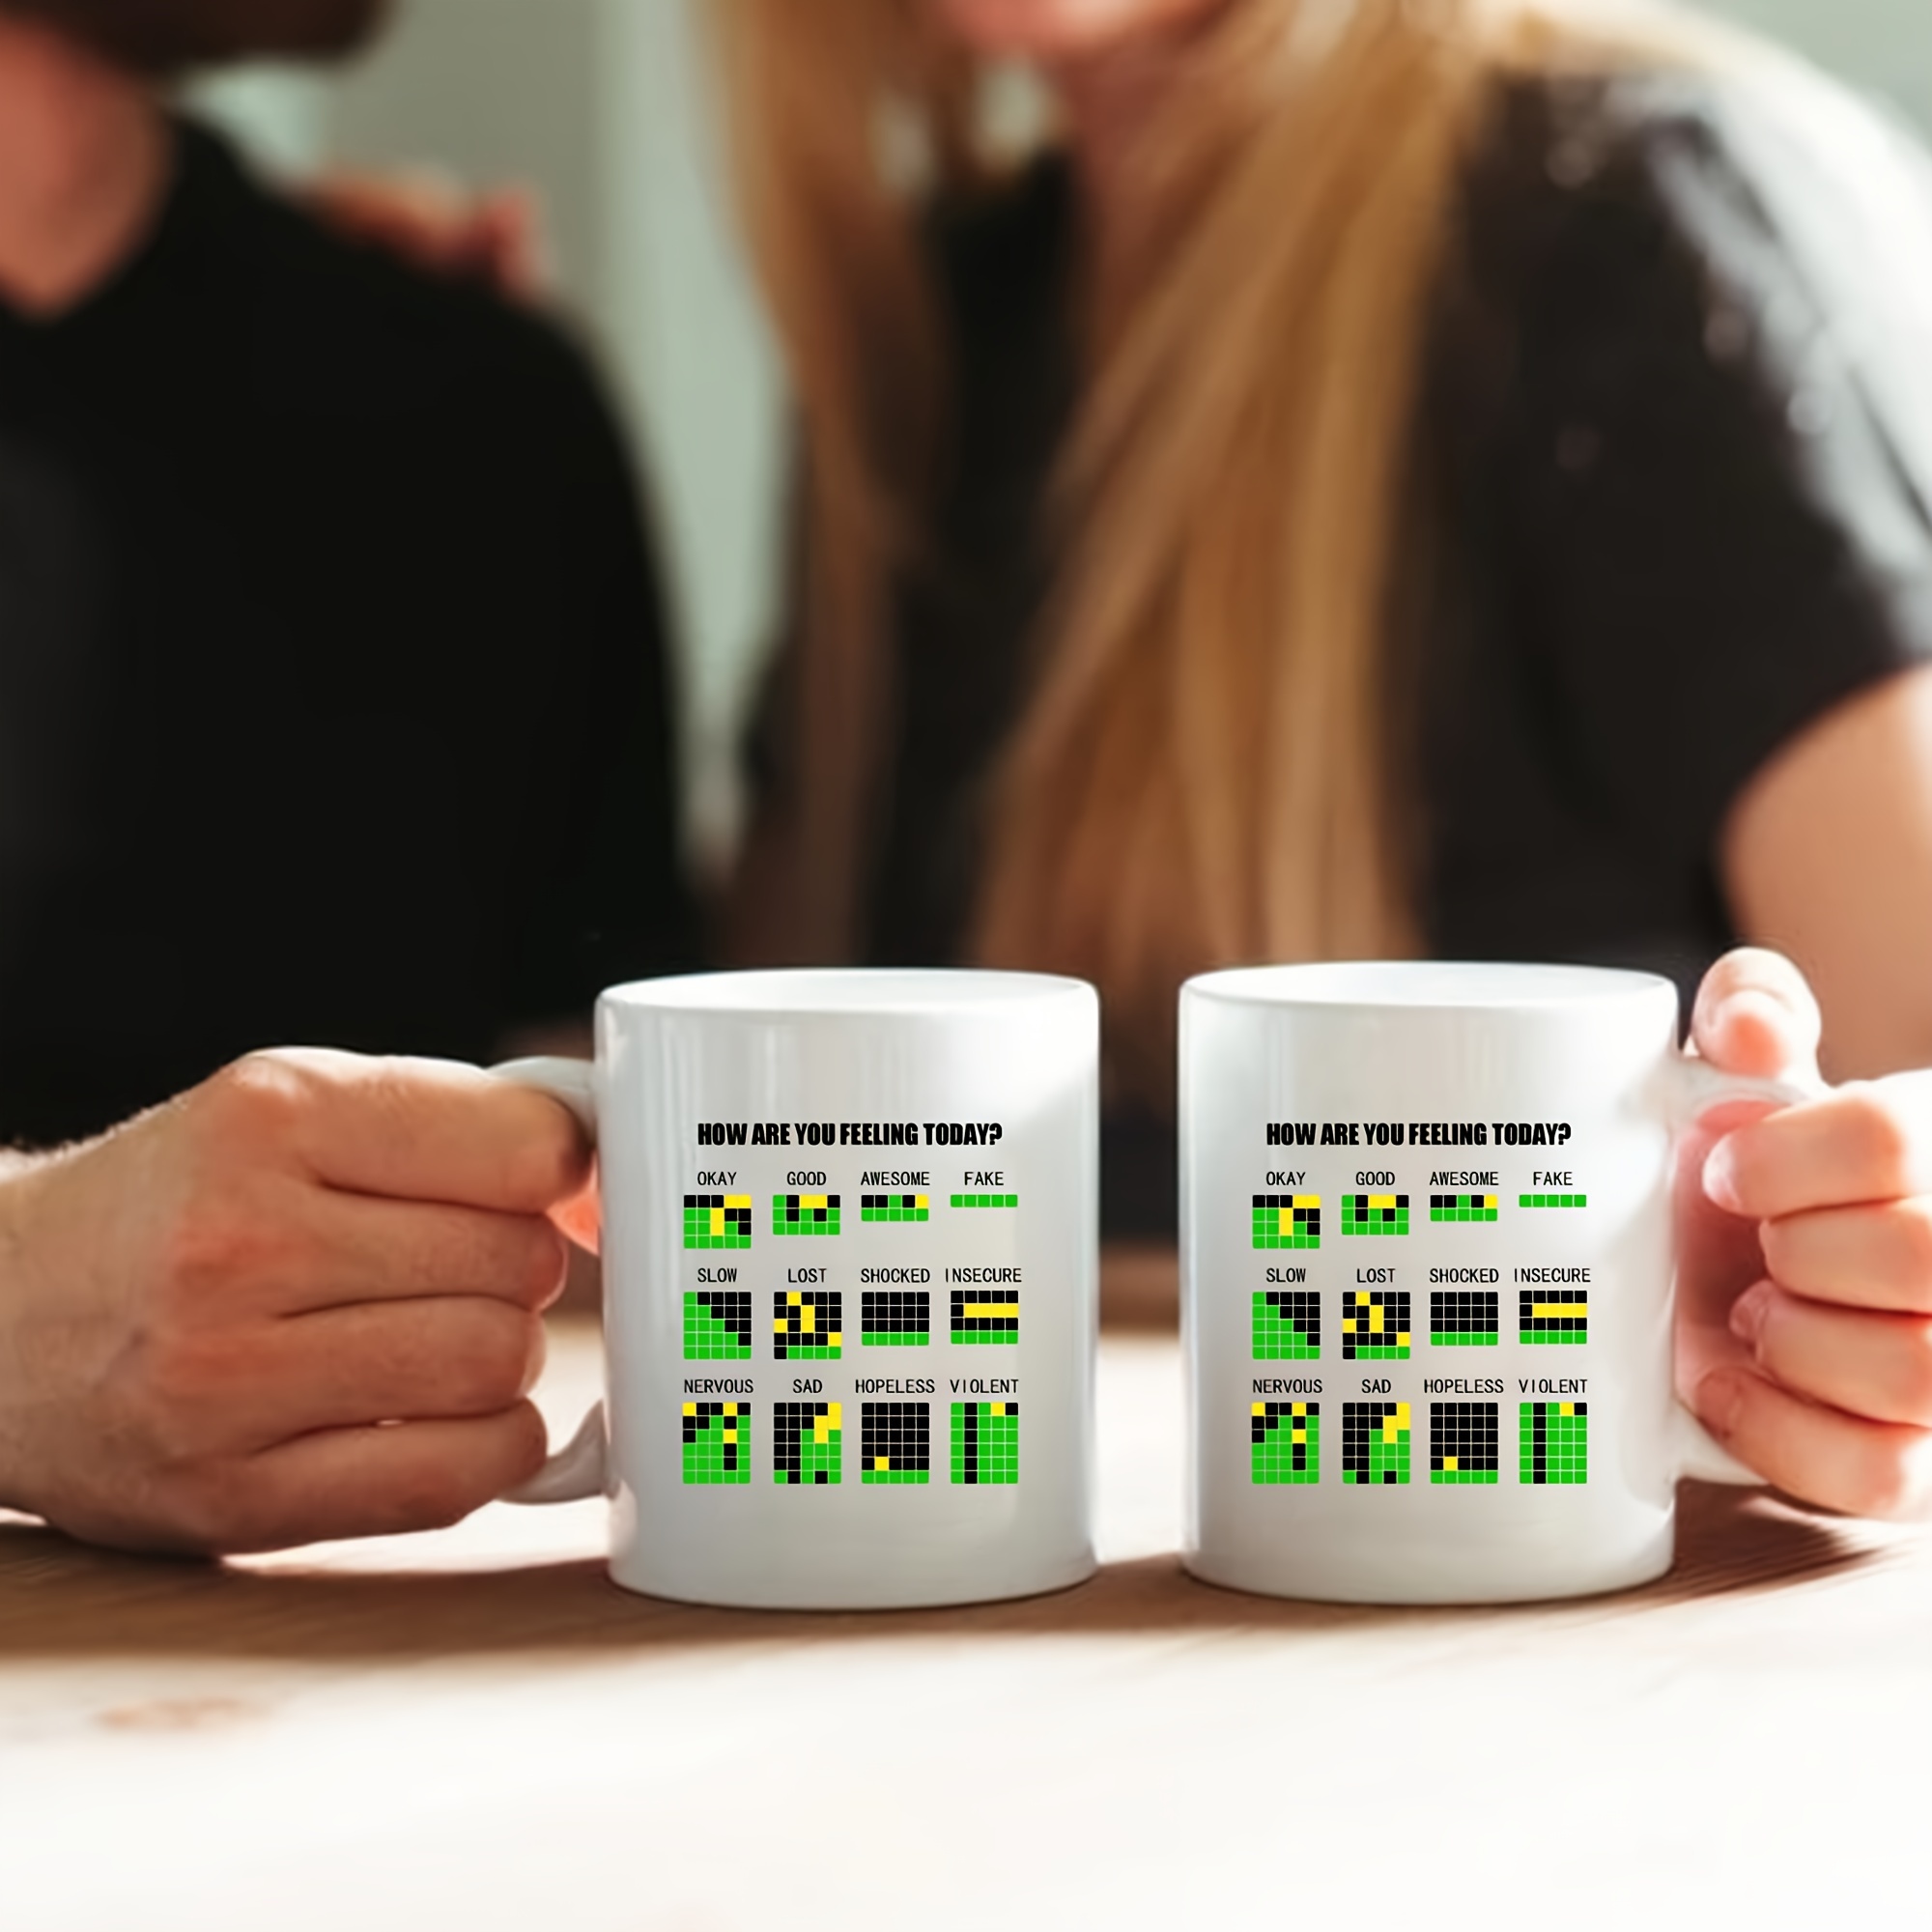 NeosKon Wordle Gift Idea - Funny Coffee Mug - You mean the Wordle to me - Funny  Mugs for Wordle Lover - Cute Coffee Mugs for Wordle game Lovers 